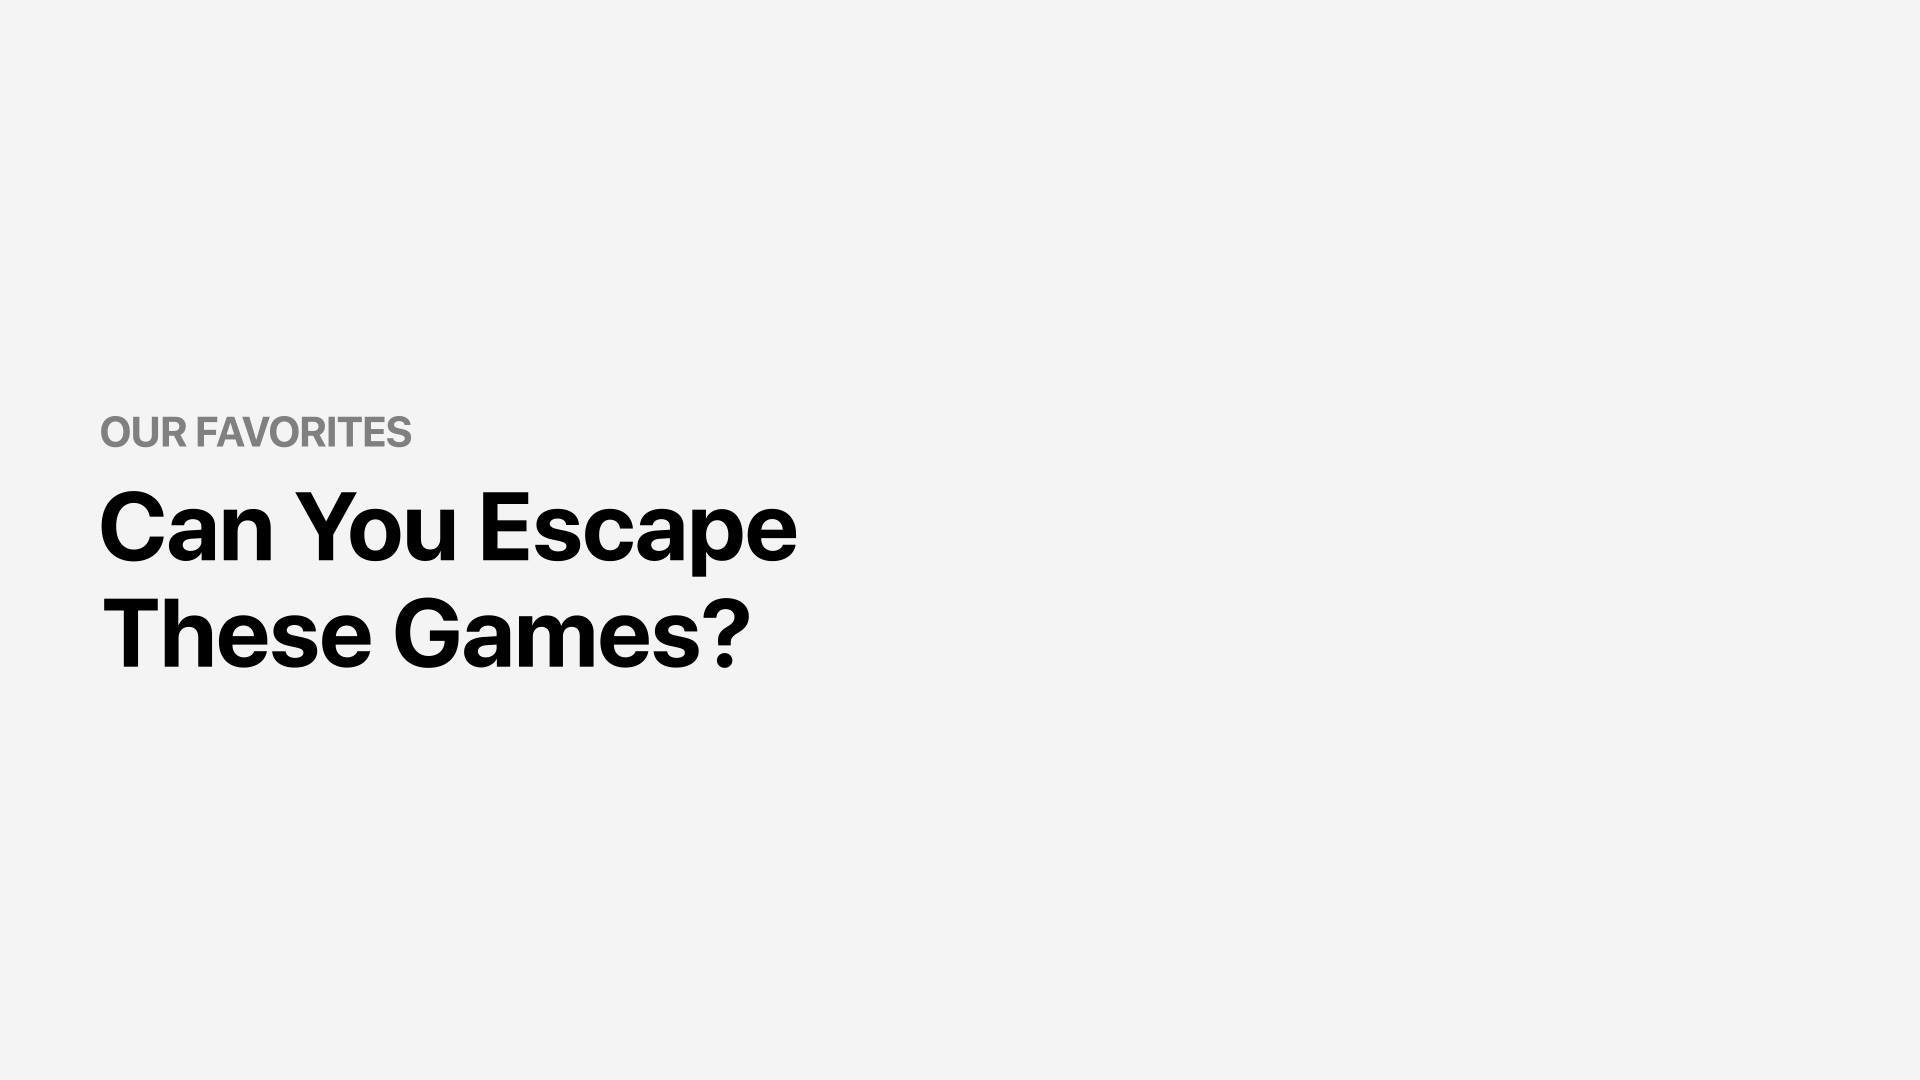 You’re trapped in an escape room with a bunch of fun and challenging puzzles. Do you have what it takes to solve them?  Try these 4 thrilling games: